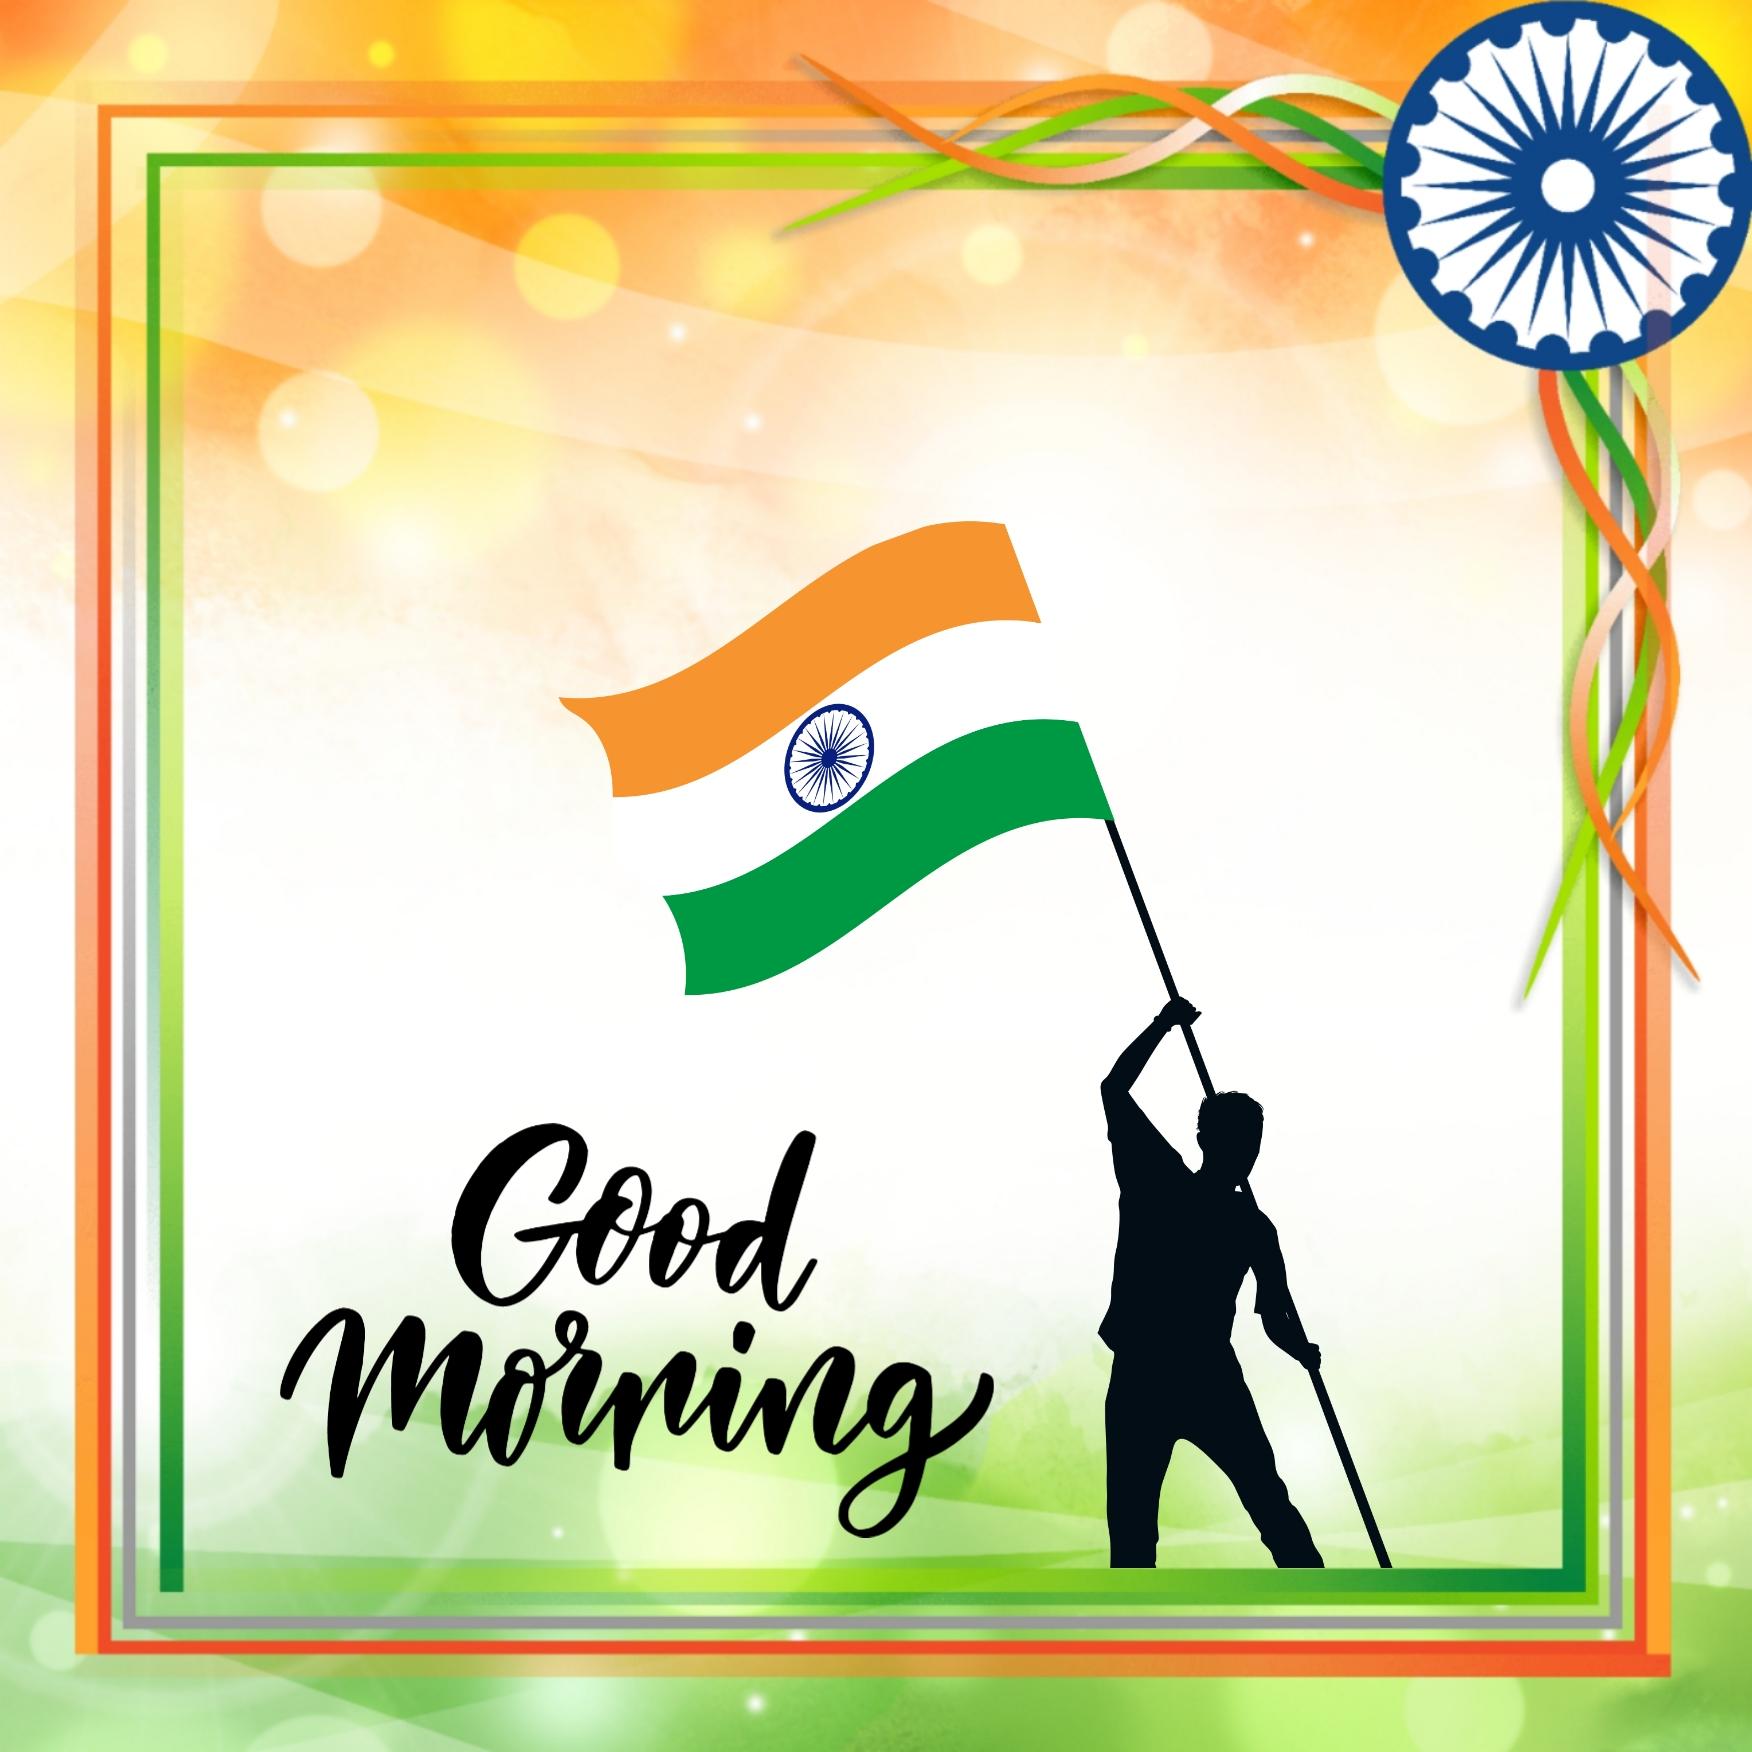 Good Morning Images of Indian Flag